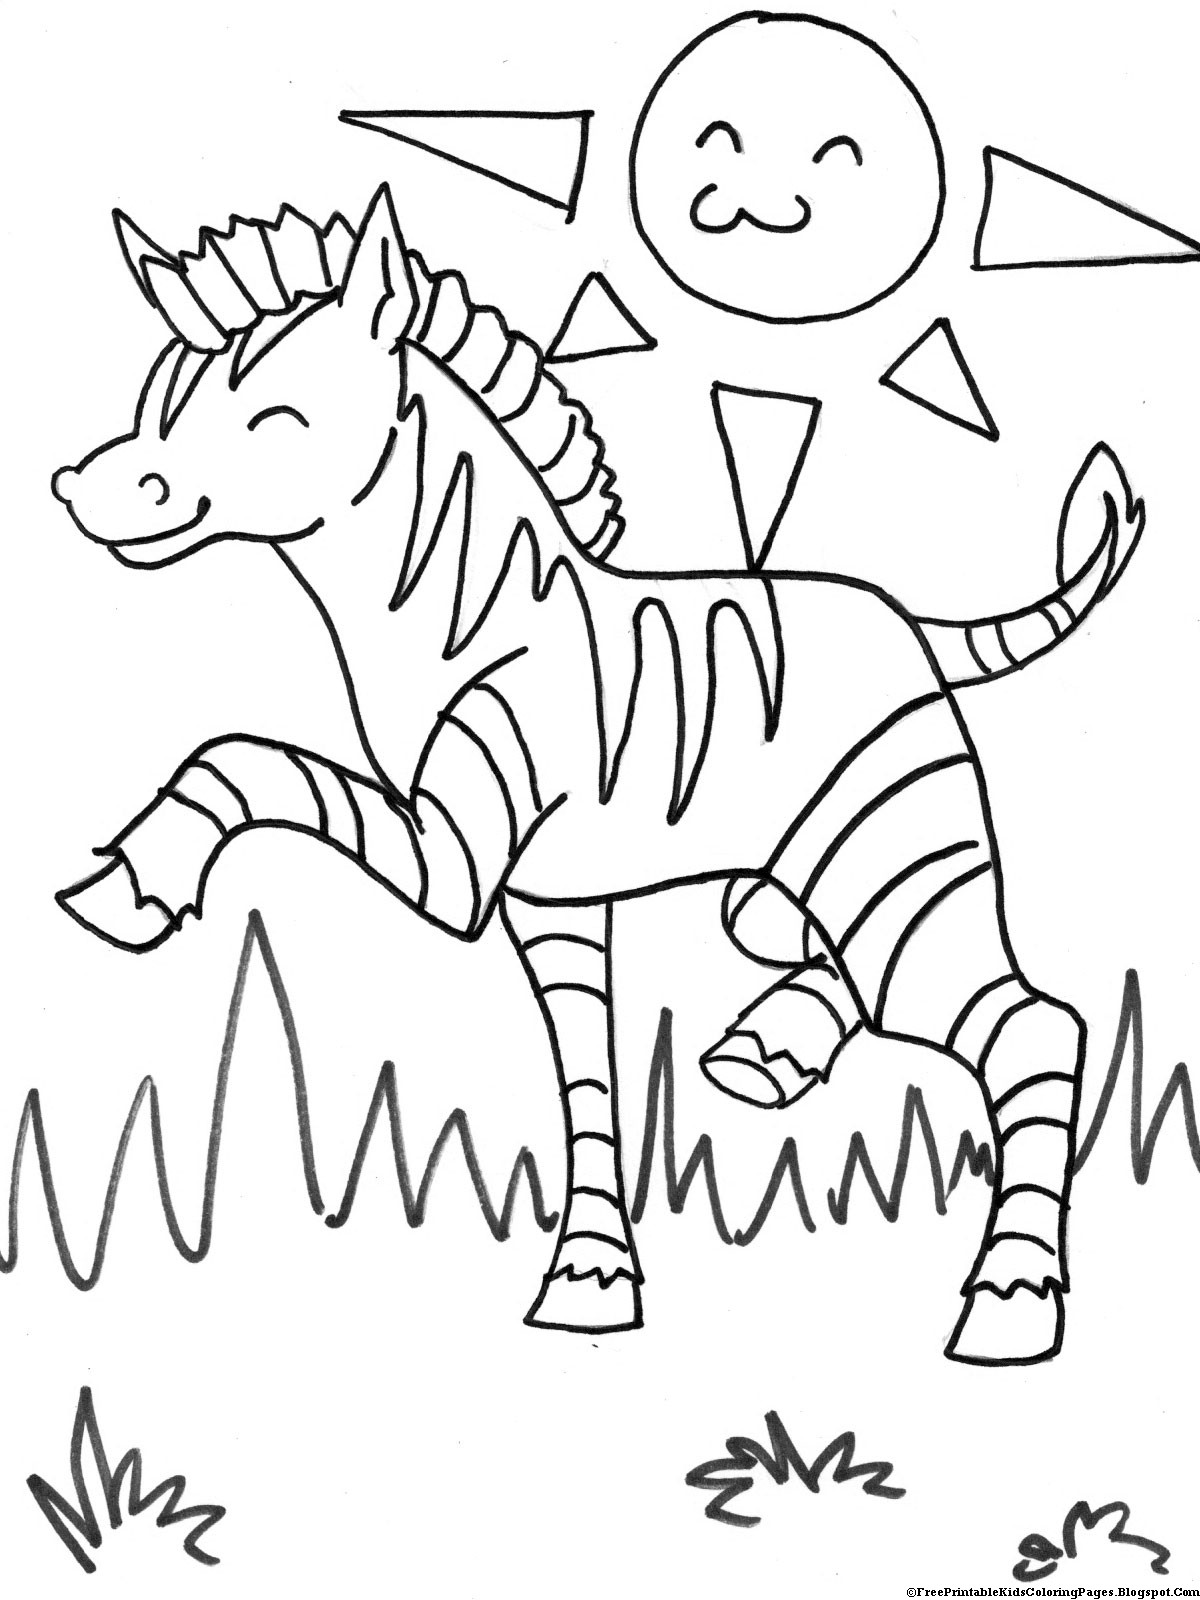 Free Animal Coloring Pages For Kids
 Zebra Coloring Pages Free Printable Kids Coloring Pages